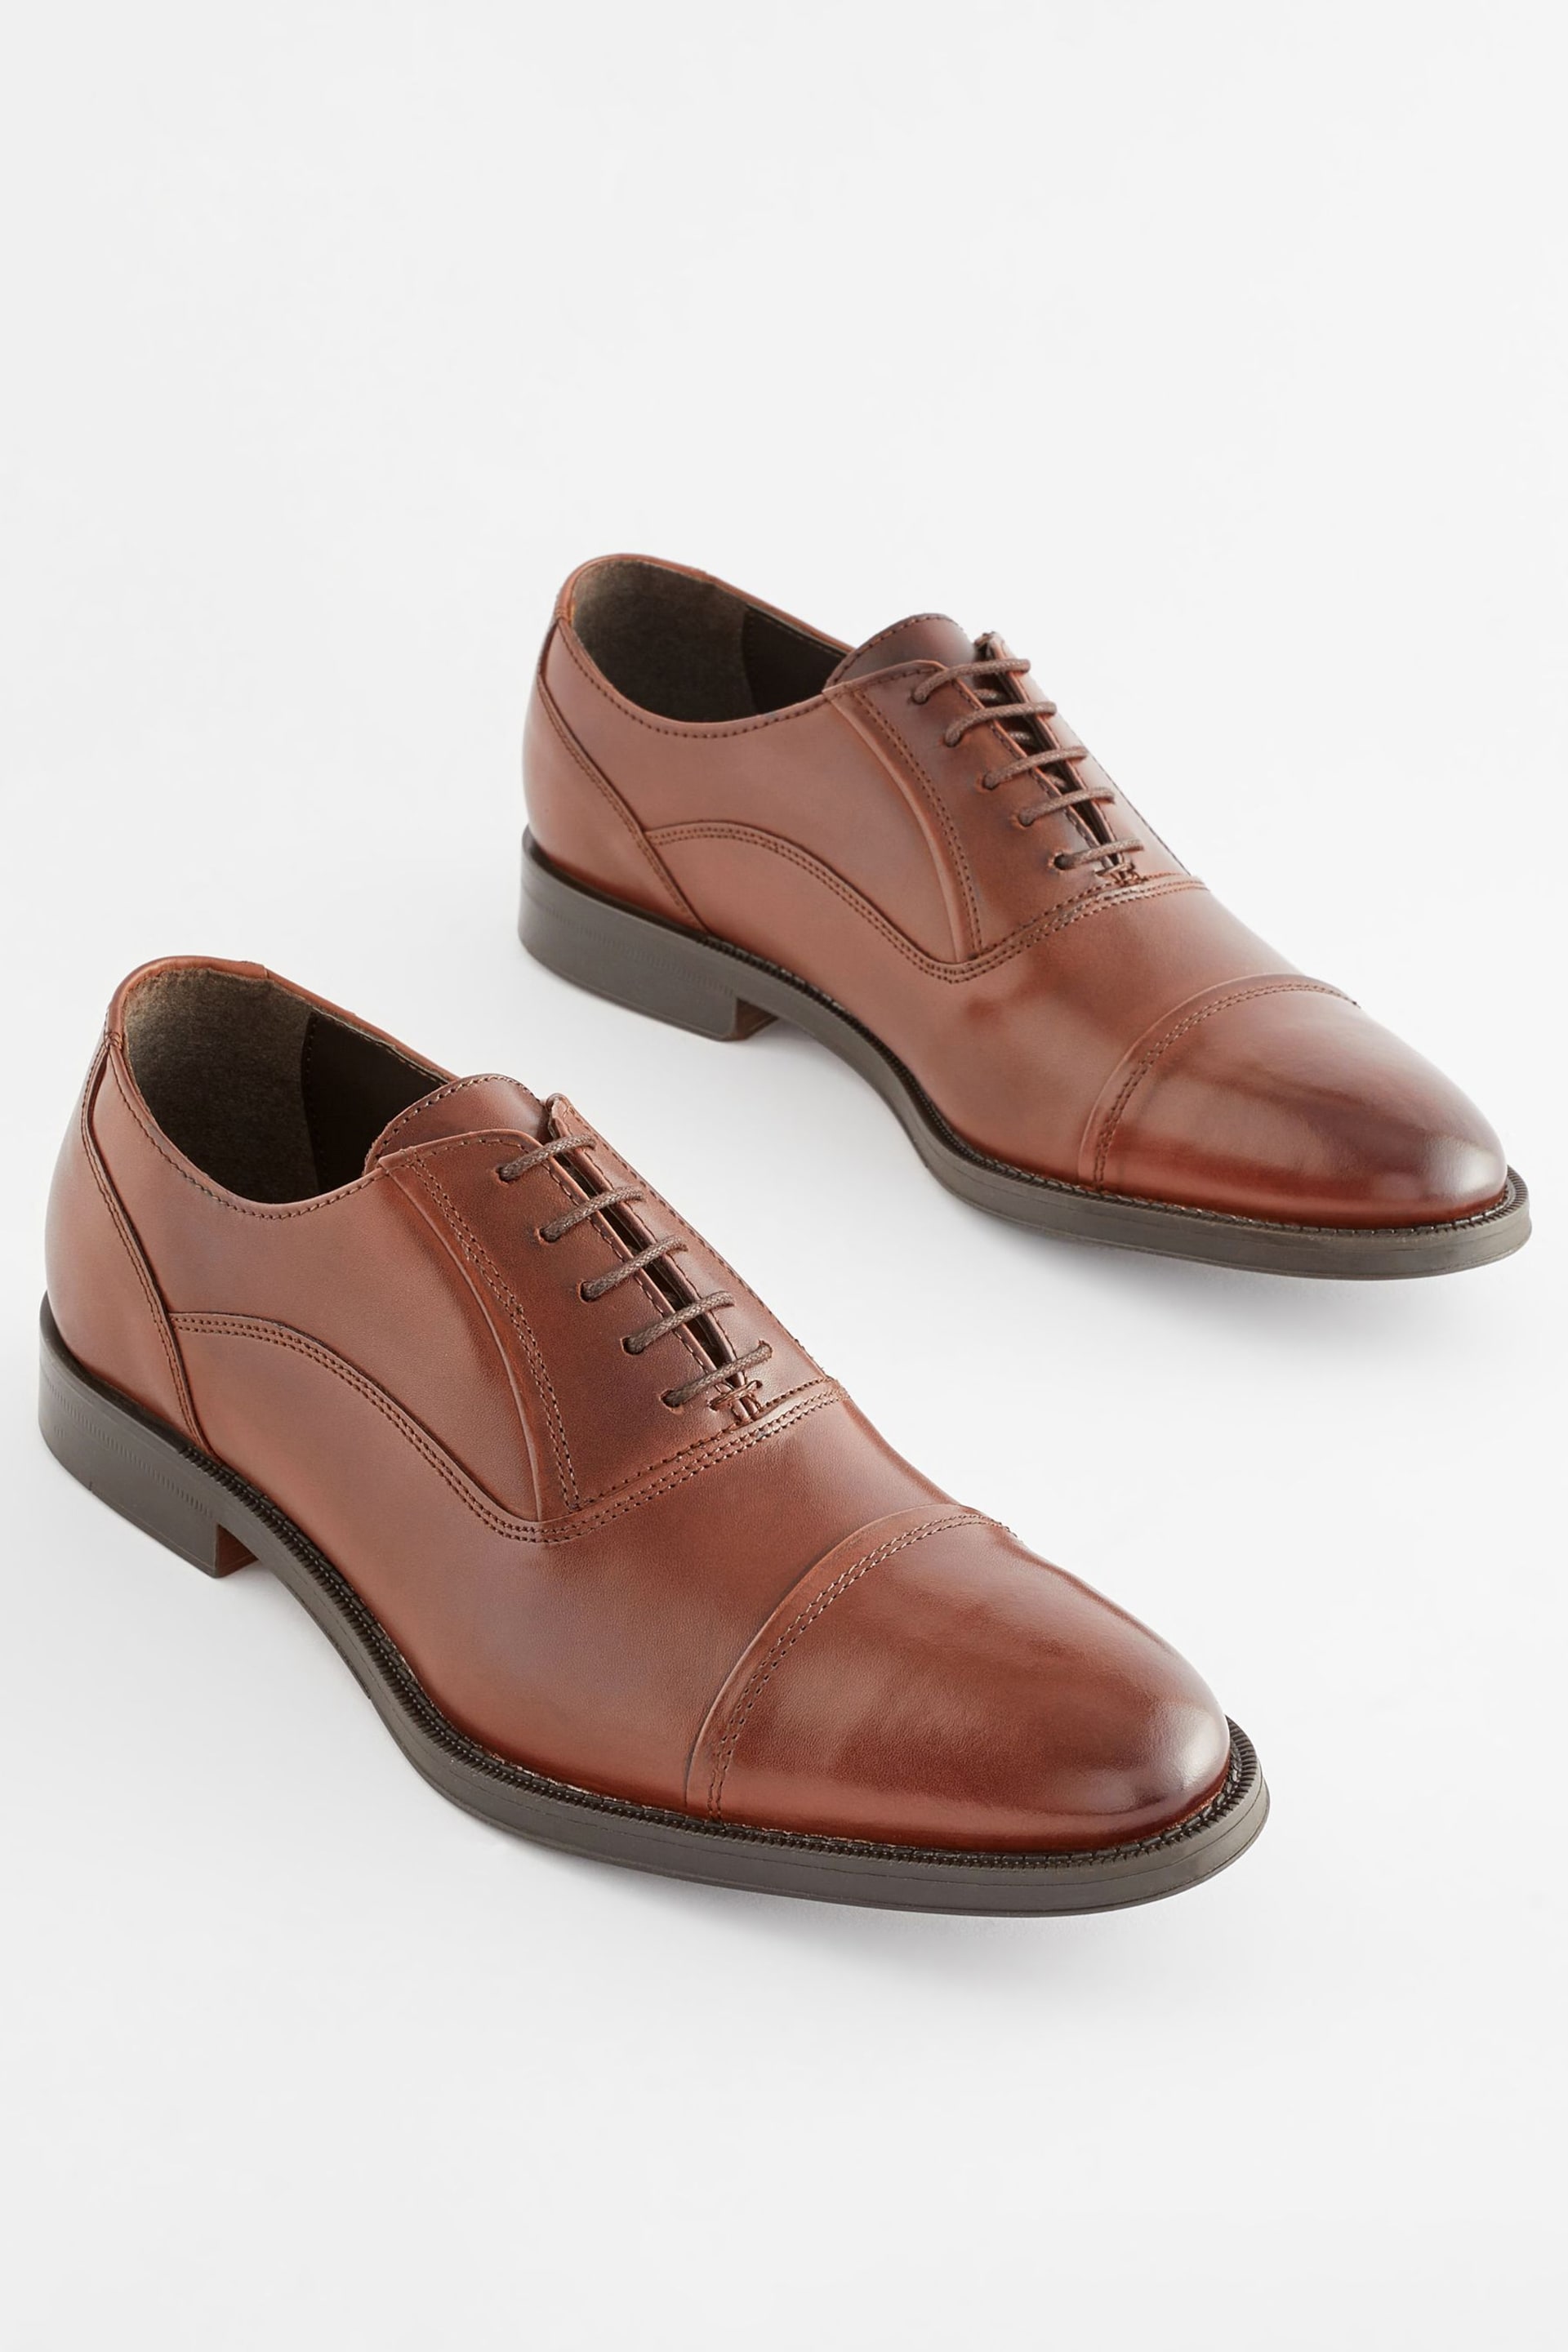 Brown Leather Oxford Toecap Shoes - Image 3 of 6